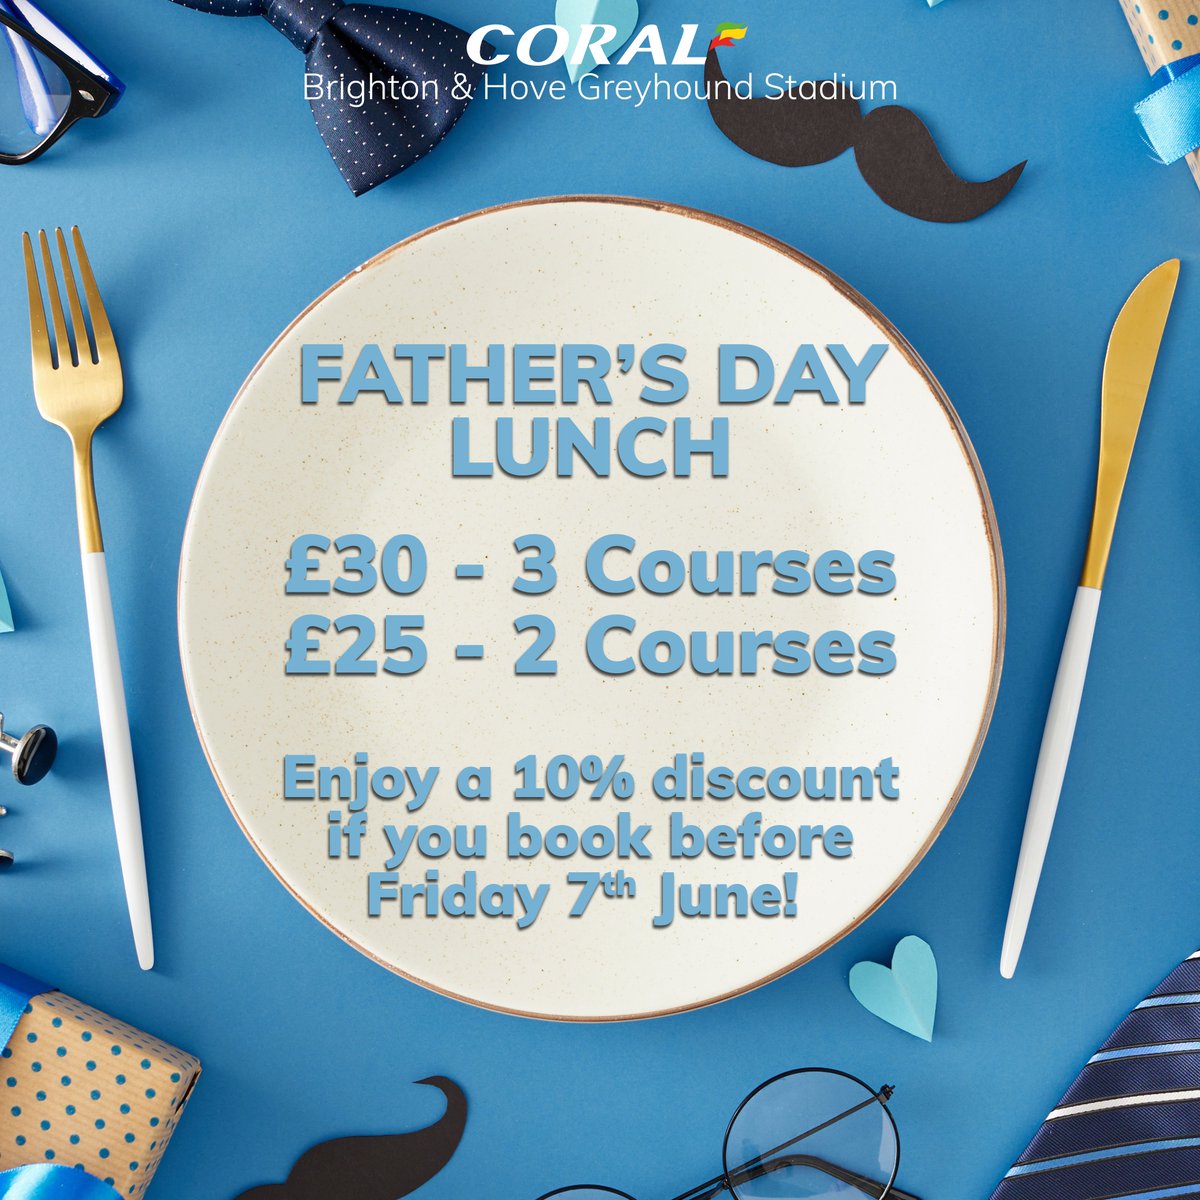 Bookings are now available for our Father's Day Lunch! Enjoy a 10% discount if you book before Friday 7th June! Book now! 📞01273 013334 📩hove.stadium@coral.co.uk 💻brightonandhovegreyhounds.co.uk/race-events/su…